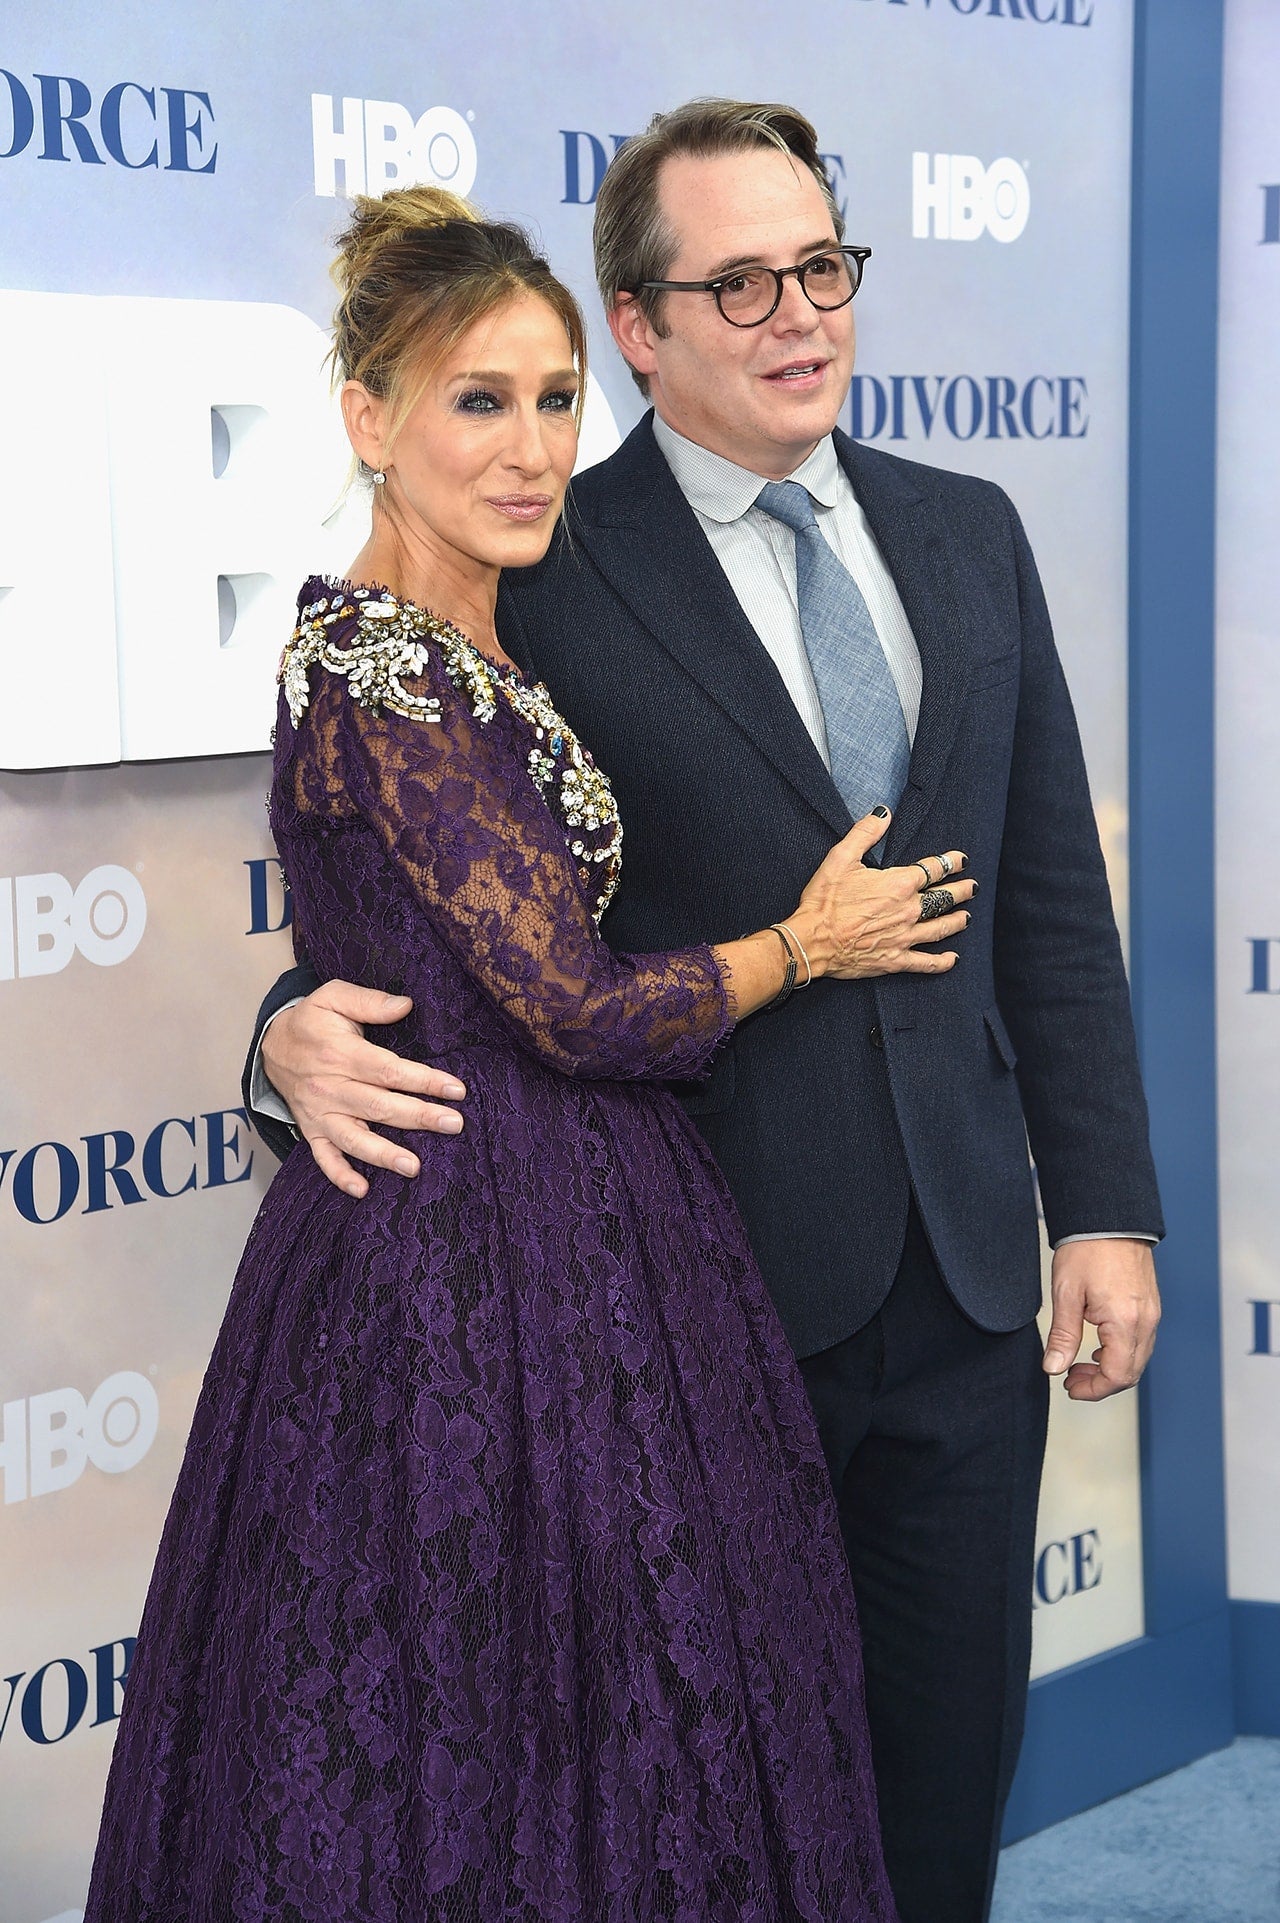 Sarah Jessica Parker Looks So In Love With Husband Matthew Broderick At Divorce Premiere